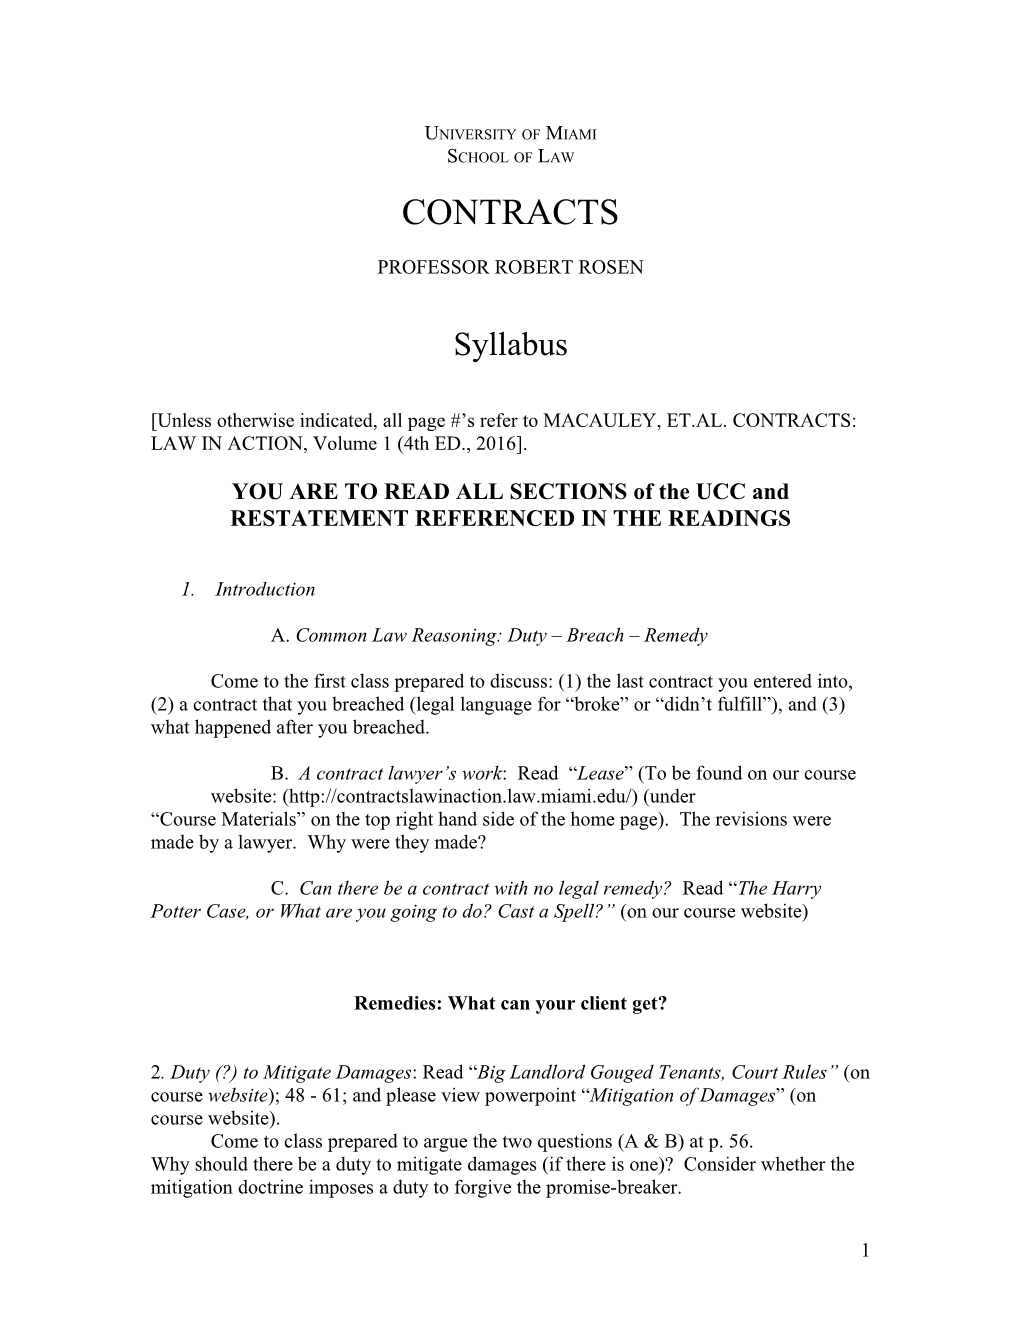 Unless Otherwise Indicated, All Page # S Refer to MACAULEY, ET.AL. CONTRACTS: LAW IN